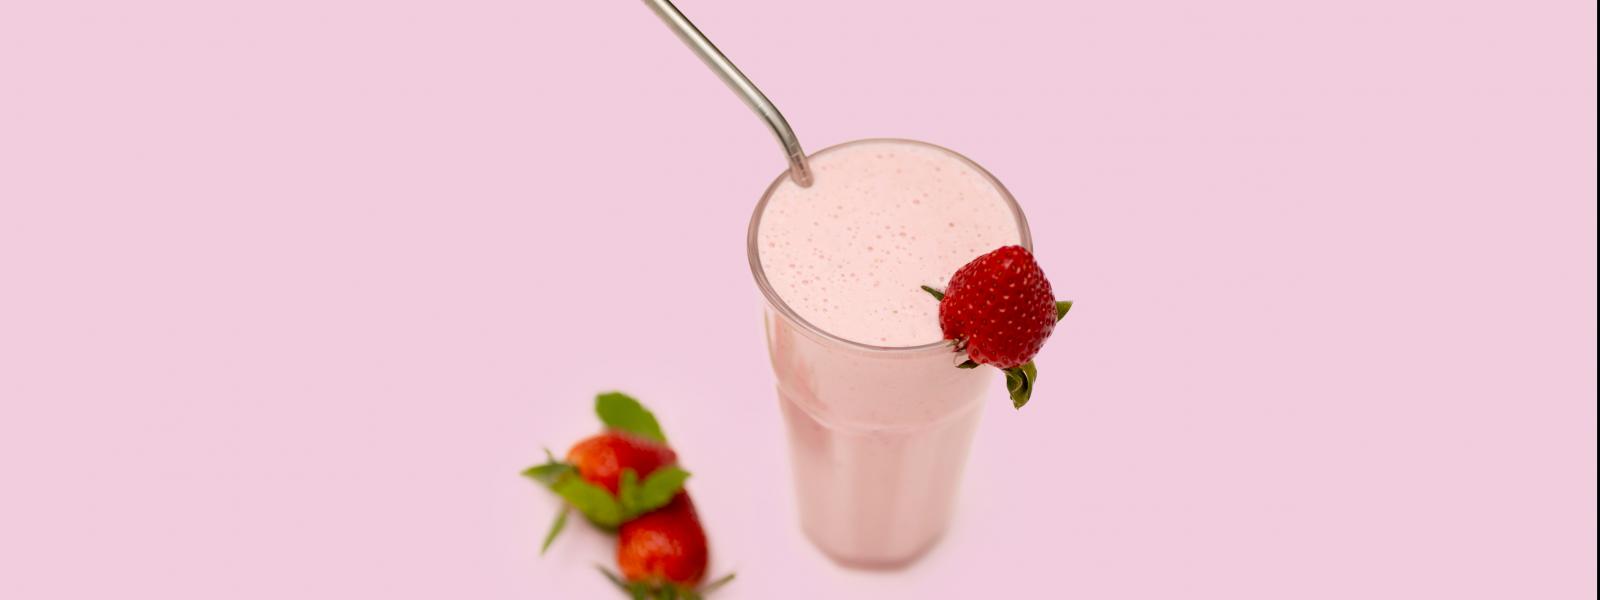 Strawberry Protein Beverage in glass with straw